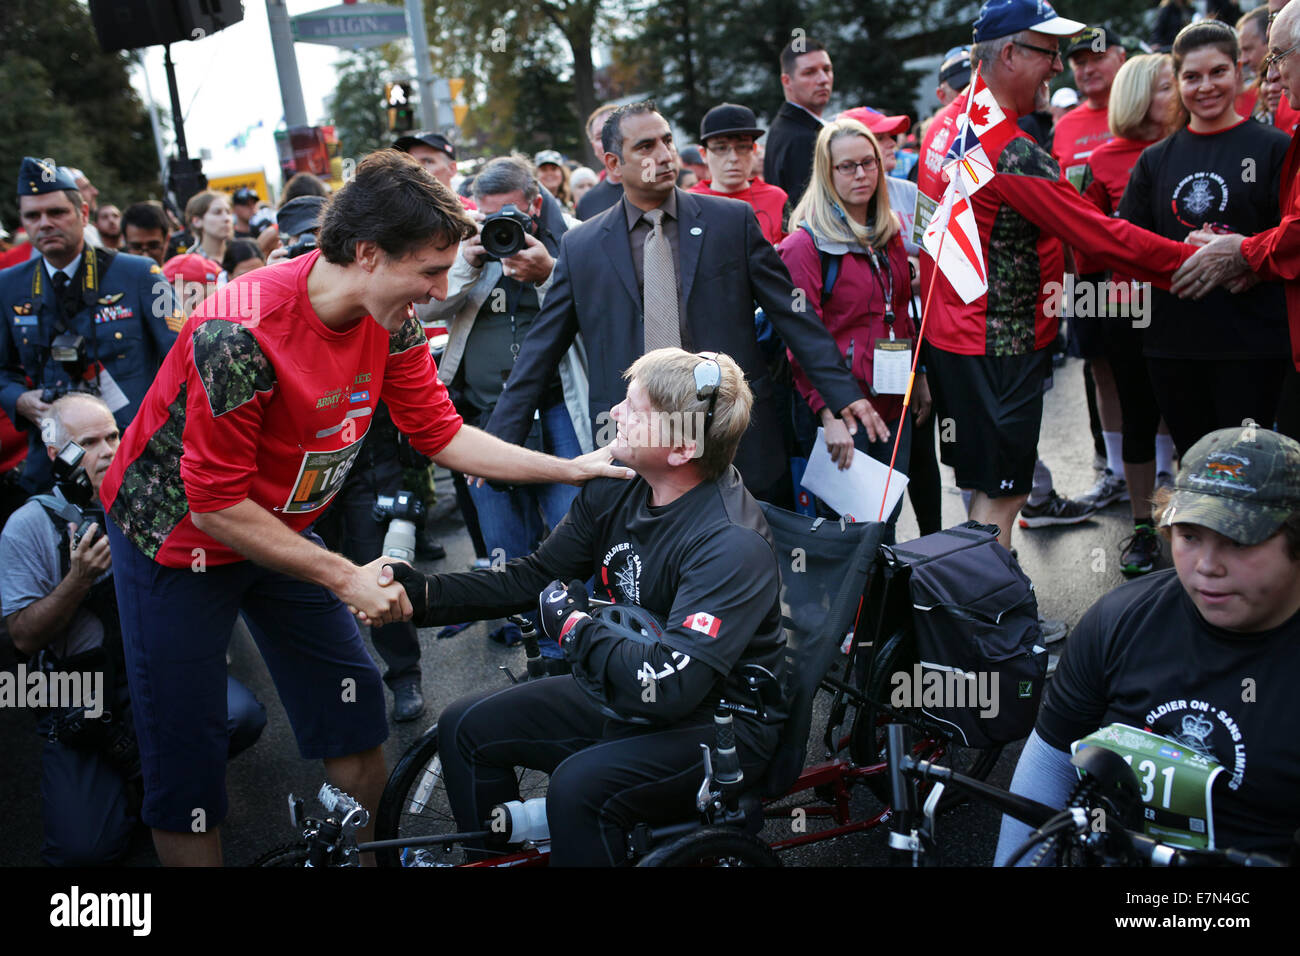 Ottawa, Canada. 21st Sep, 2014. Leader of the Liberal Party of Canada Justin Trudeau (L Front) encourages Greg Jamesn at the 2014 Canada Army Run in Ottawa, Canada, on Sept. 21, 2014. Injured soldiers and disabled athletes were among 25,000 runners at the annual event that helps raise money for military families. Credit:  Cole Burston/Xinhua/Alamy Live News Stock Photo